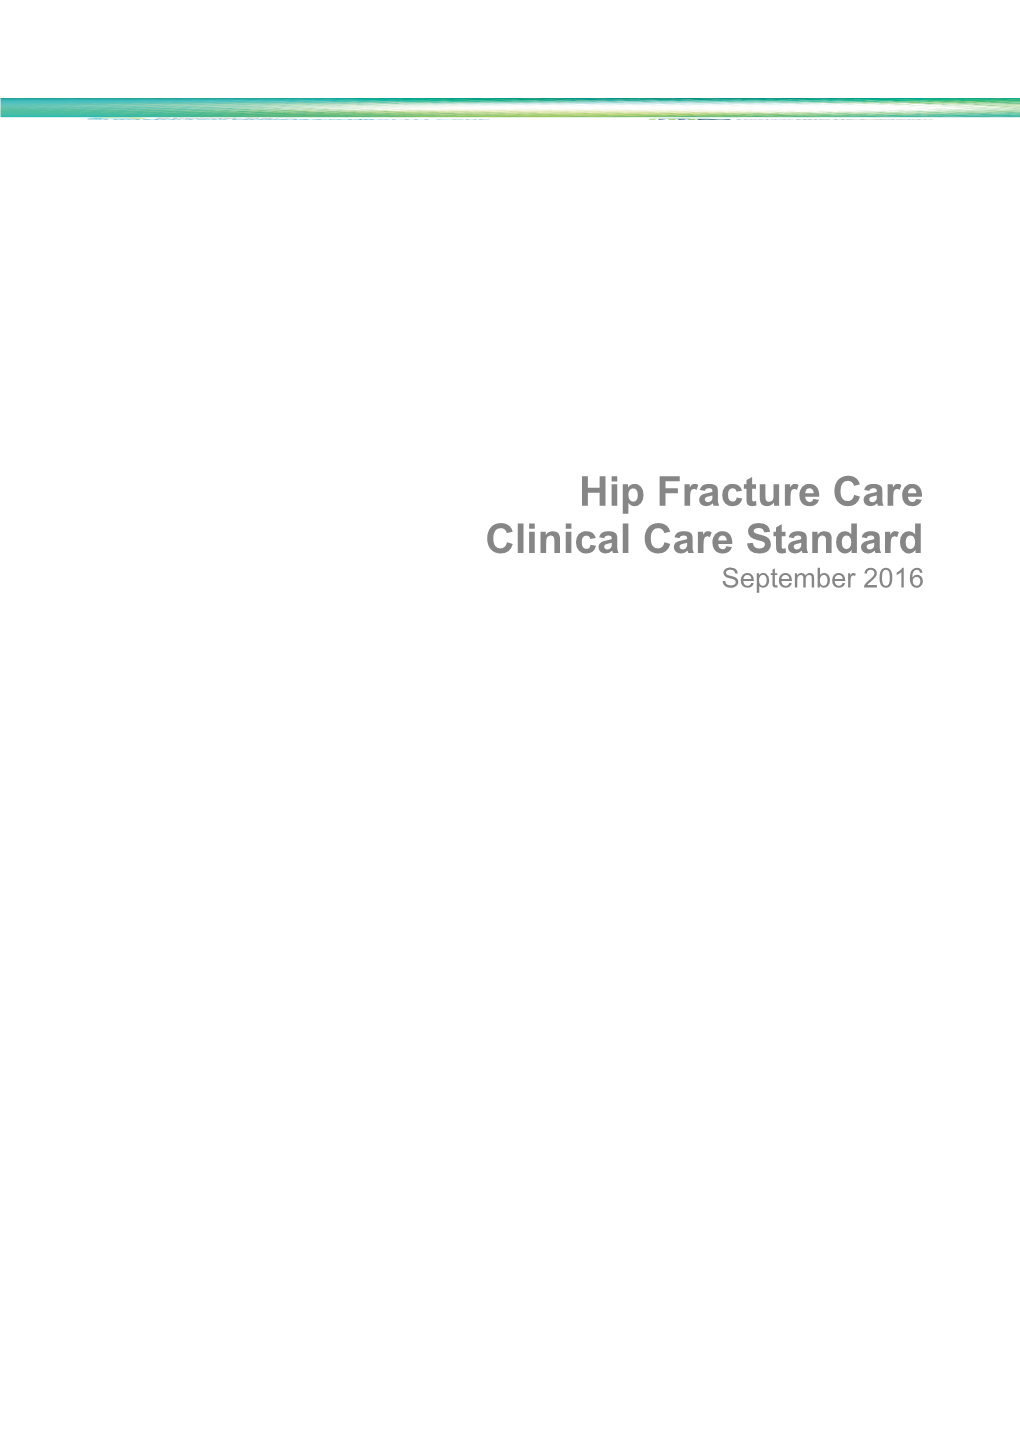 Hip Fracture Care Clinical Care Standard